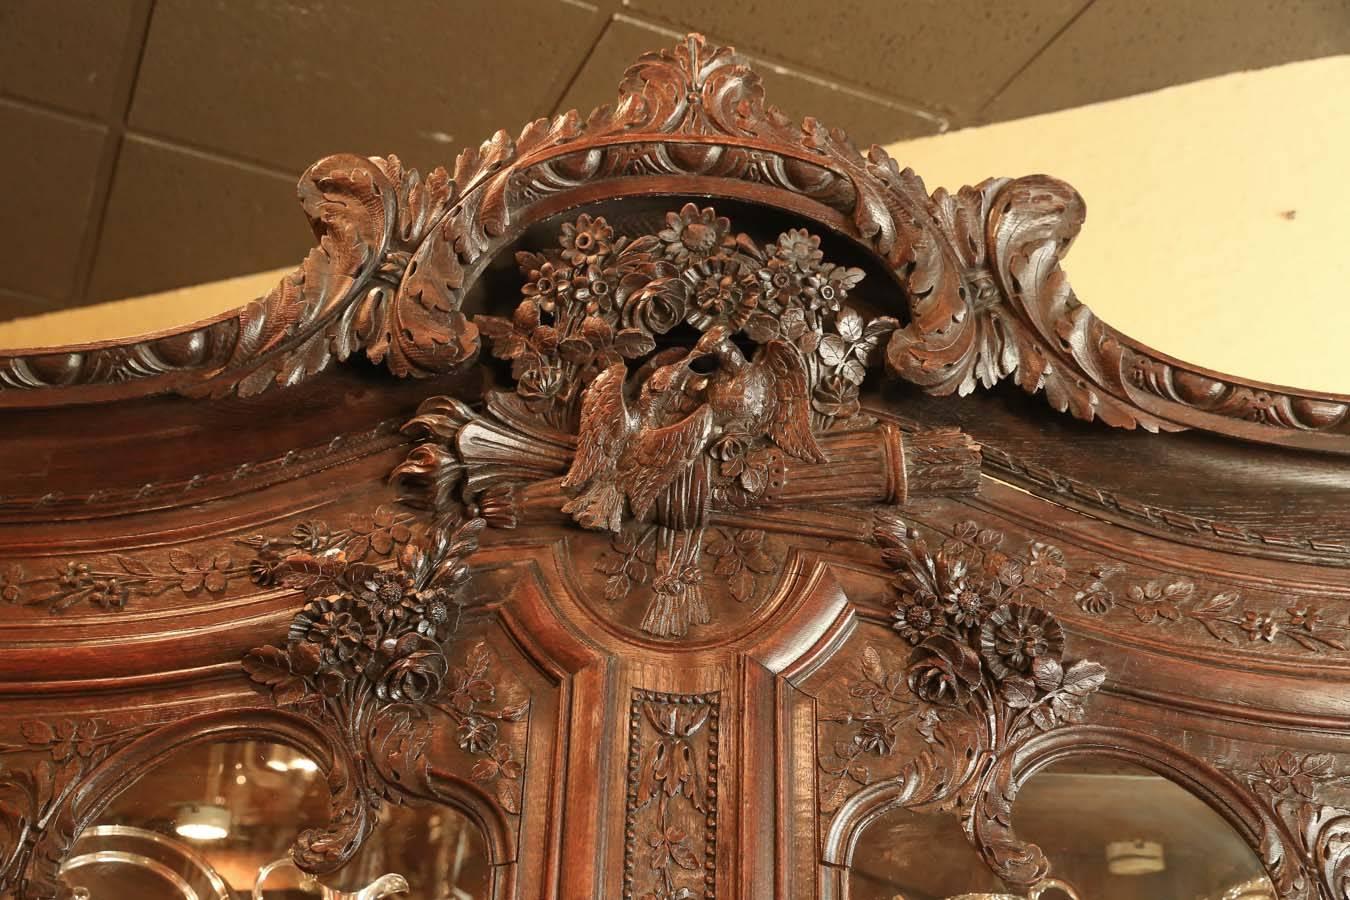 French display cabinet with carvings of love birds.
It has three glass shelves that have been added as well,
as mirrored back and mirror on the bottom. The shelves
are adjustable. The cabinet is made of oak and dates to
Late 19th century, it has